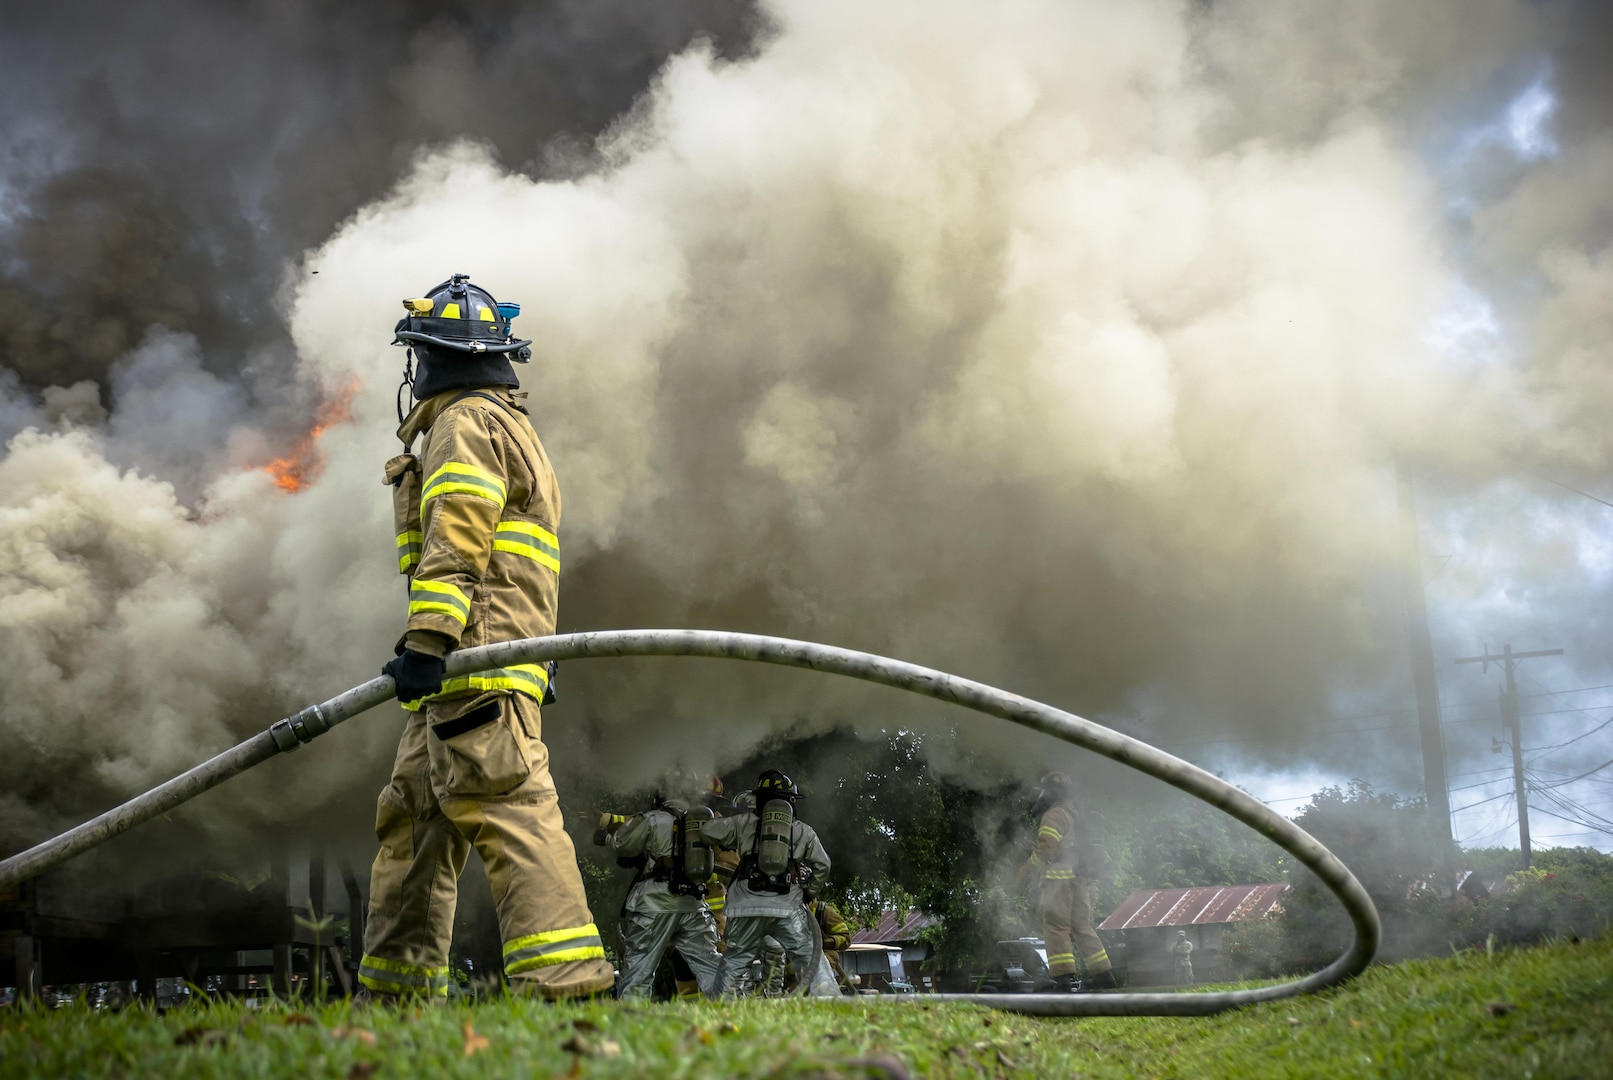 Senior Airman Christopher L. Allen assists his team by helping pull the nozzle through and holding the line as the weight can be taxing. The 612th ABS Fire Department host a public fire training at Soto Cano Air Base, June 16, 2017. (U.S. Air Force photo by Senior Airman Julie Kae/released)